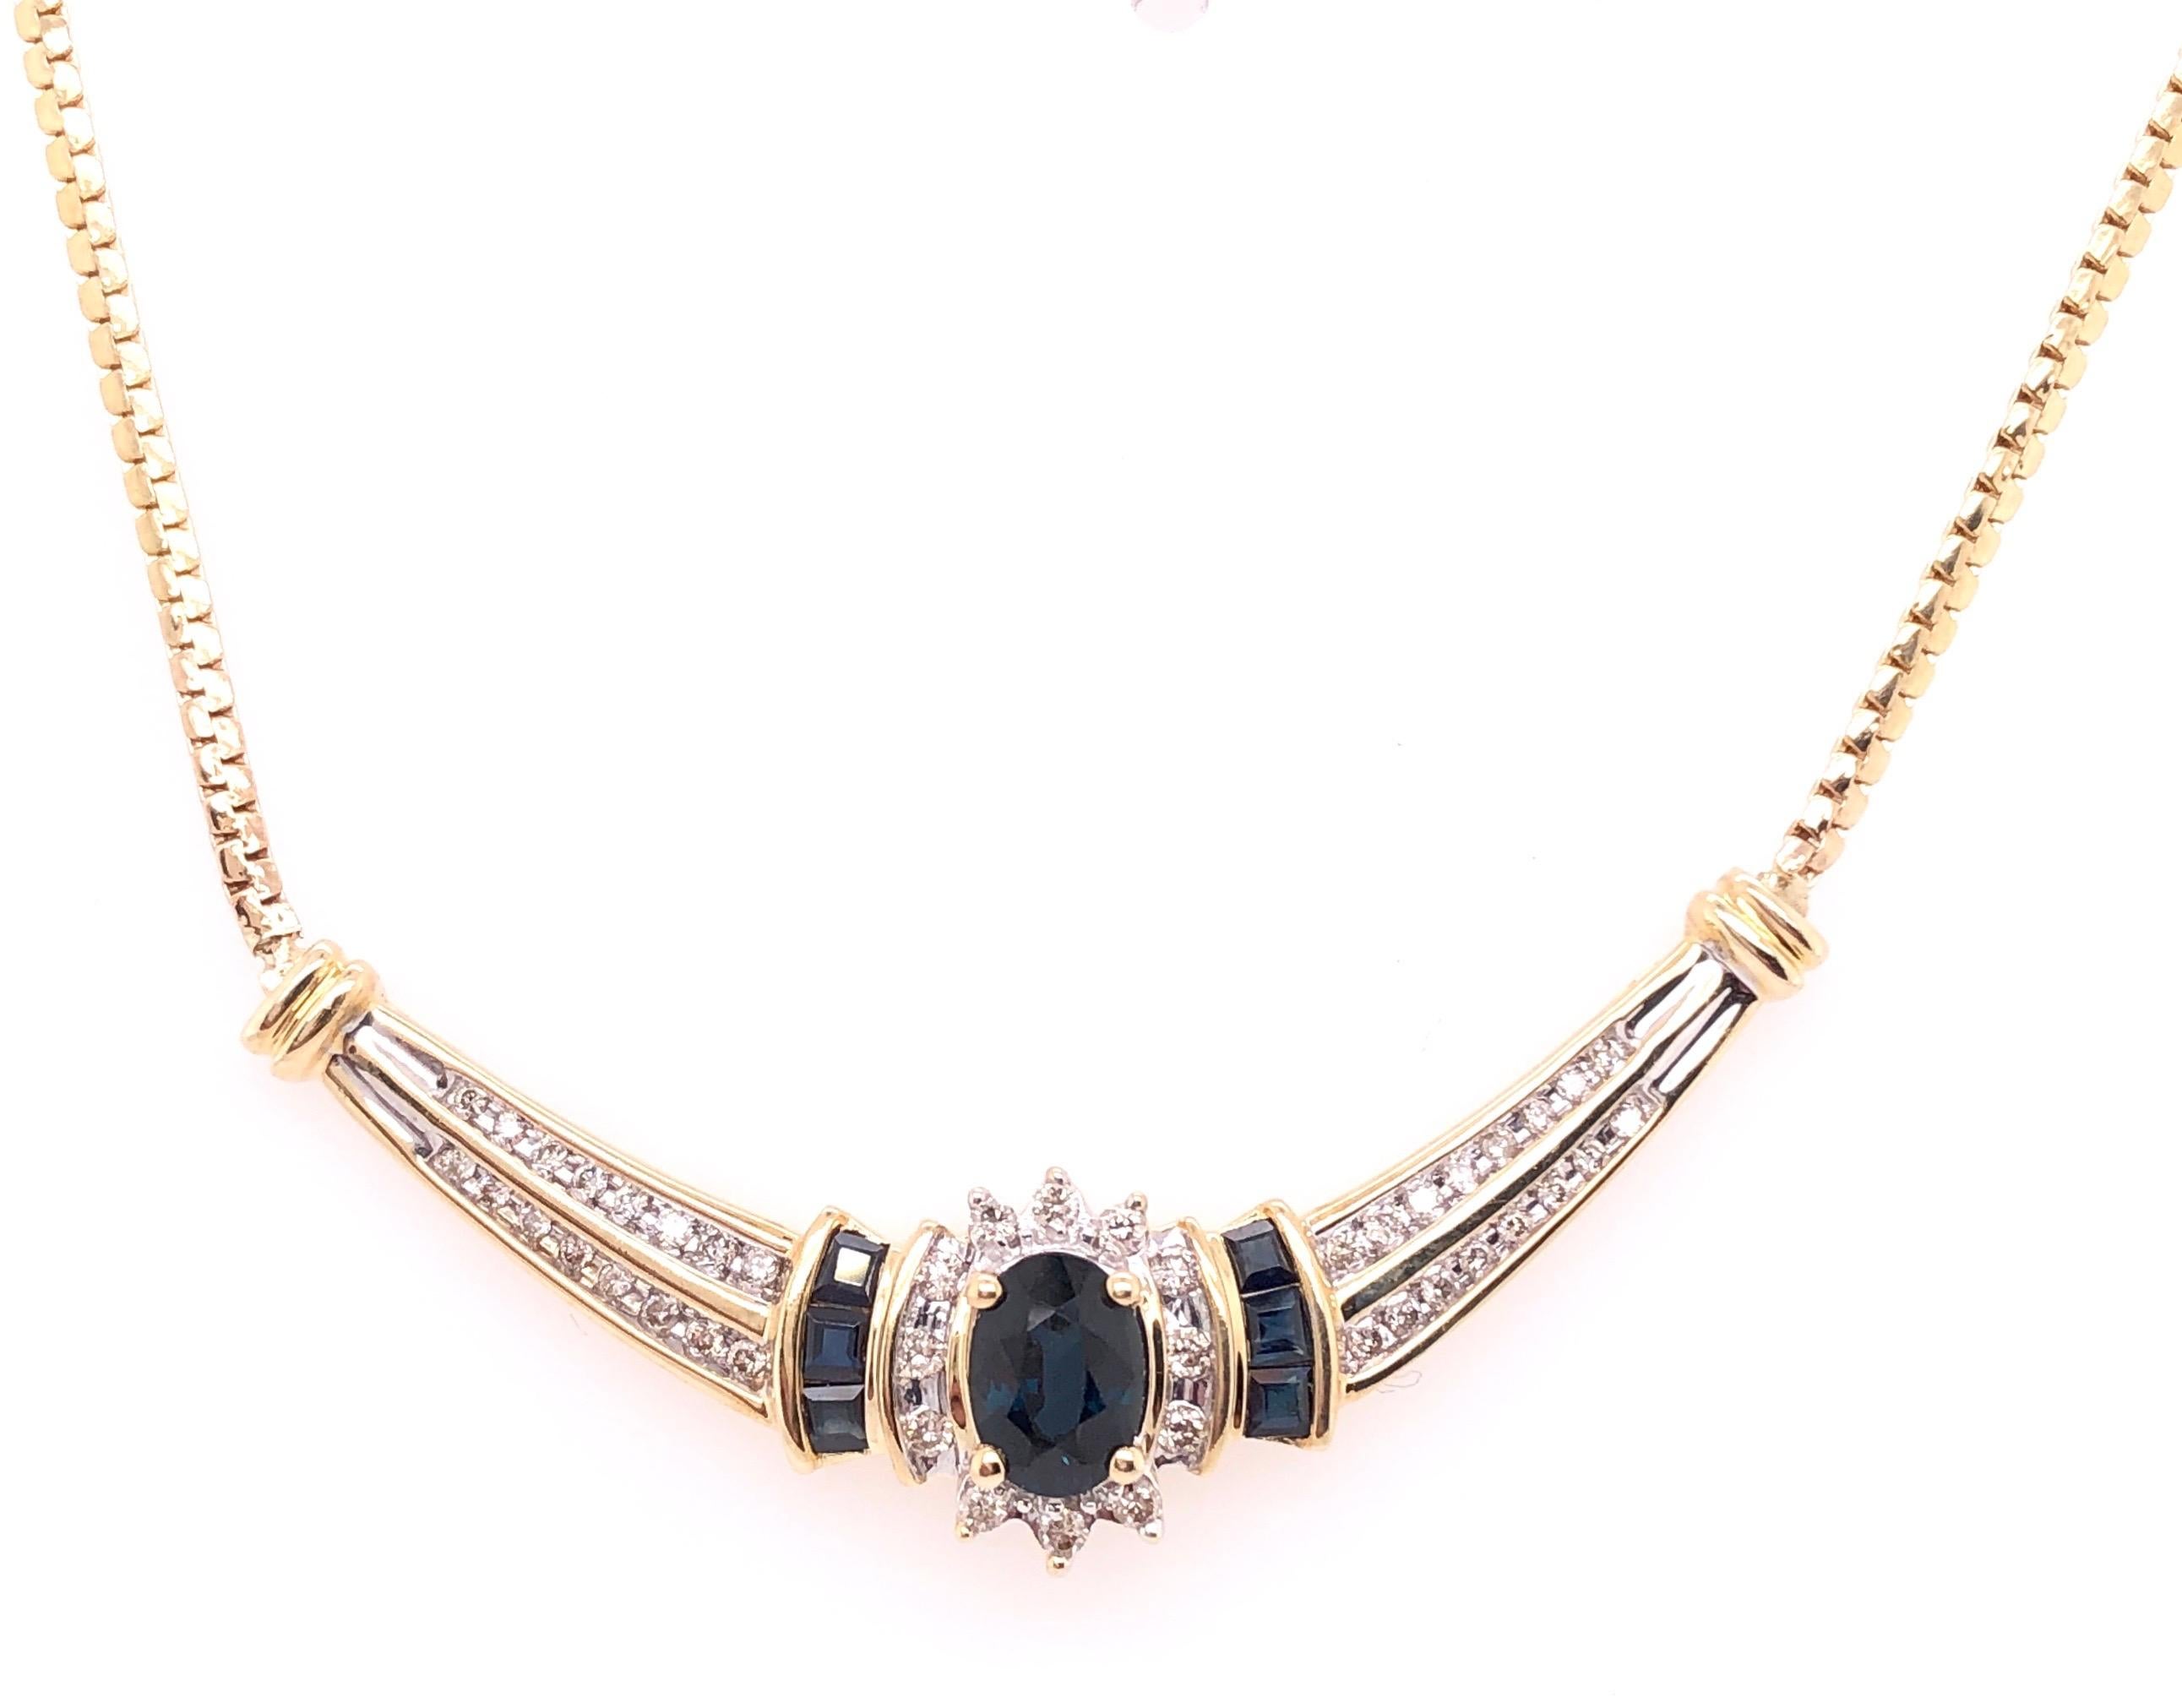 14Kt Yellow Gold Cable Necklace with Oval Sapphire 1.00 Total Diamond Weight
6.6 grams total weight